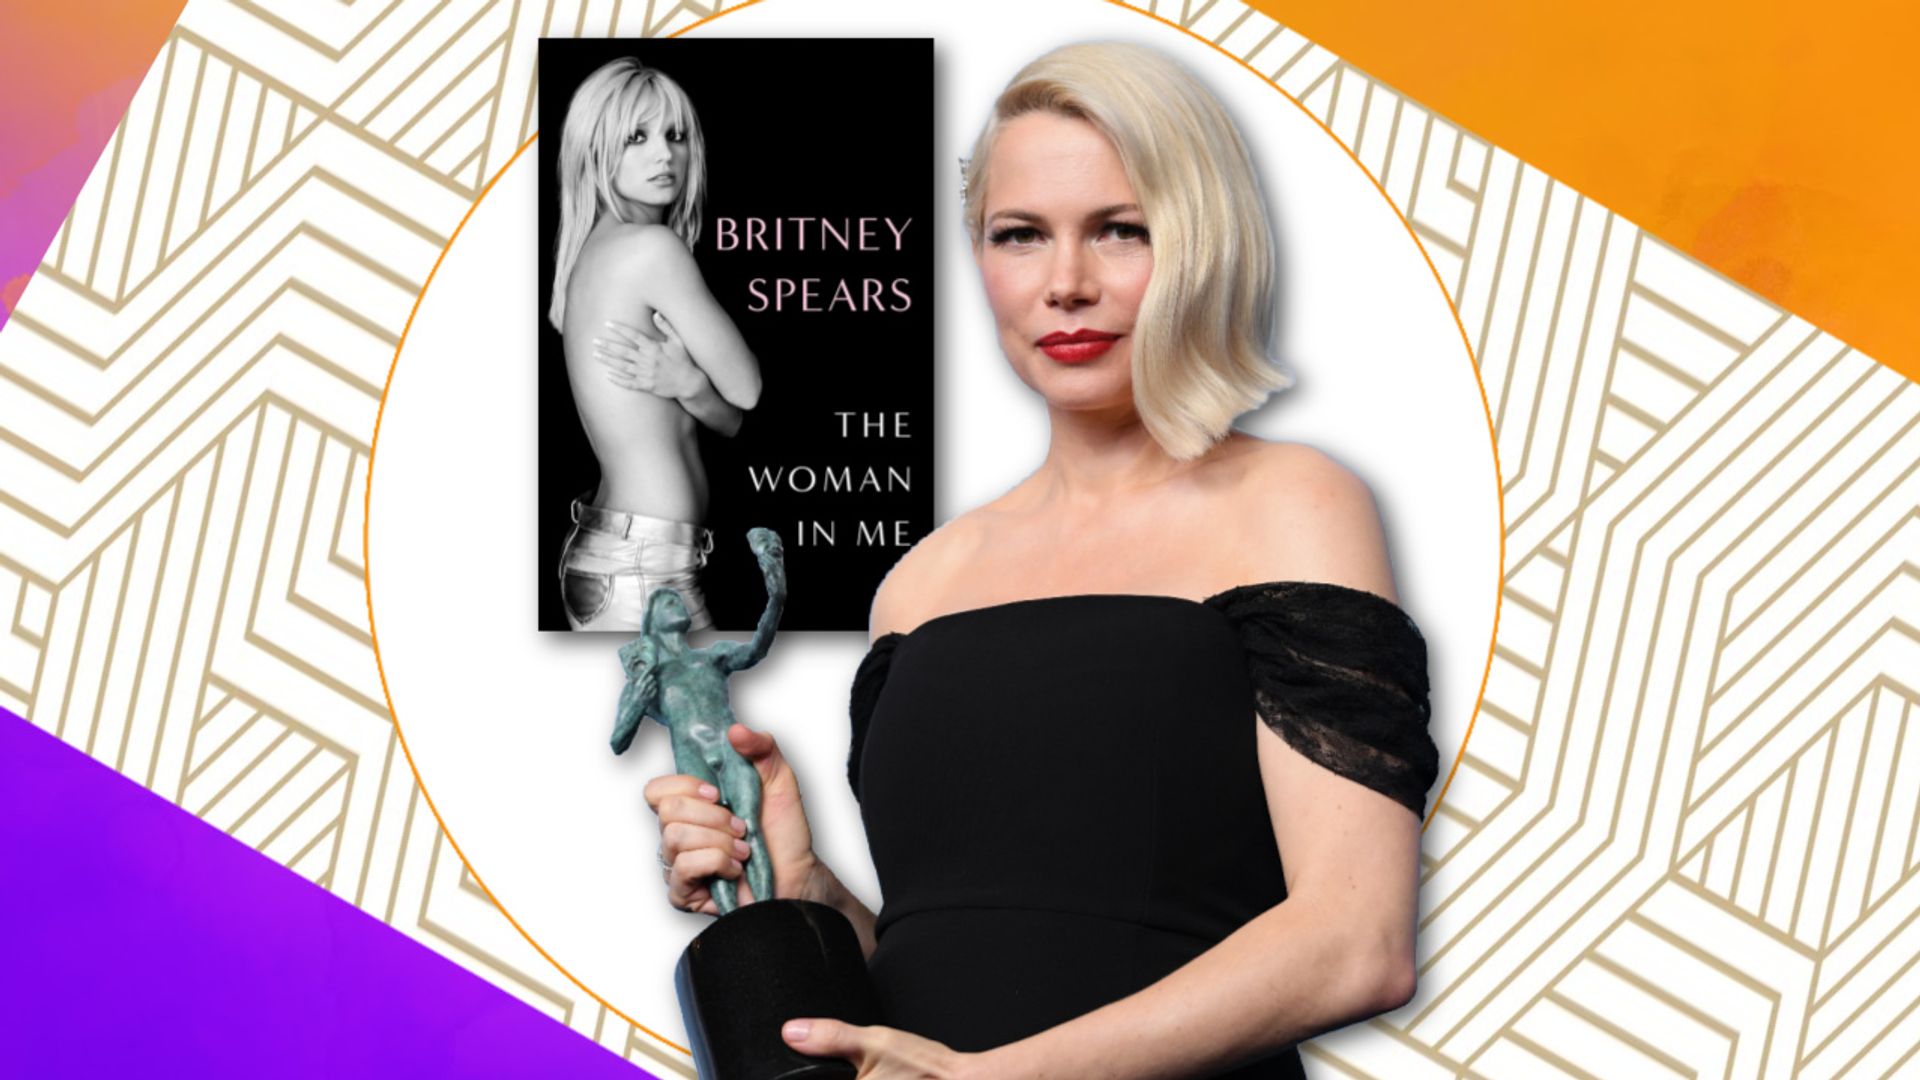 Michelle Williams goes viral for narrating Britney Spears' book to absolute perfection - listen for yourself